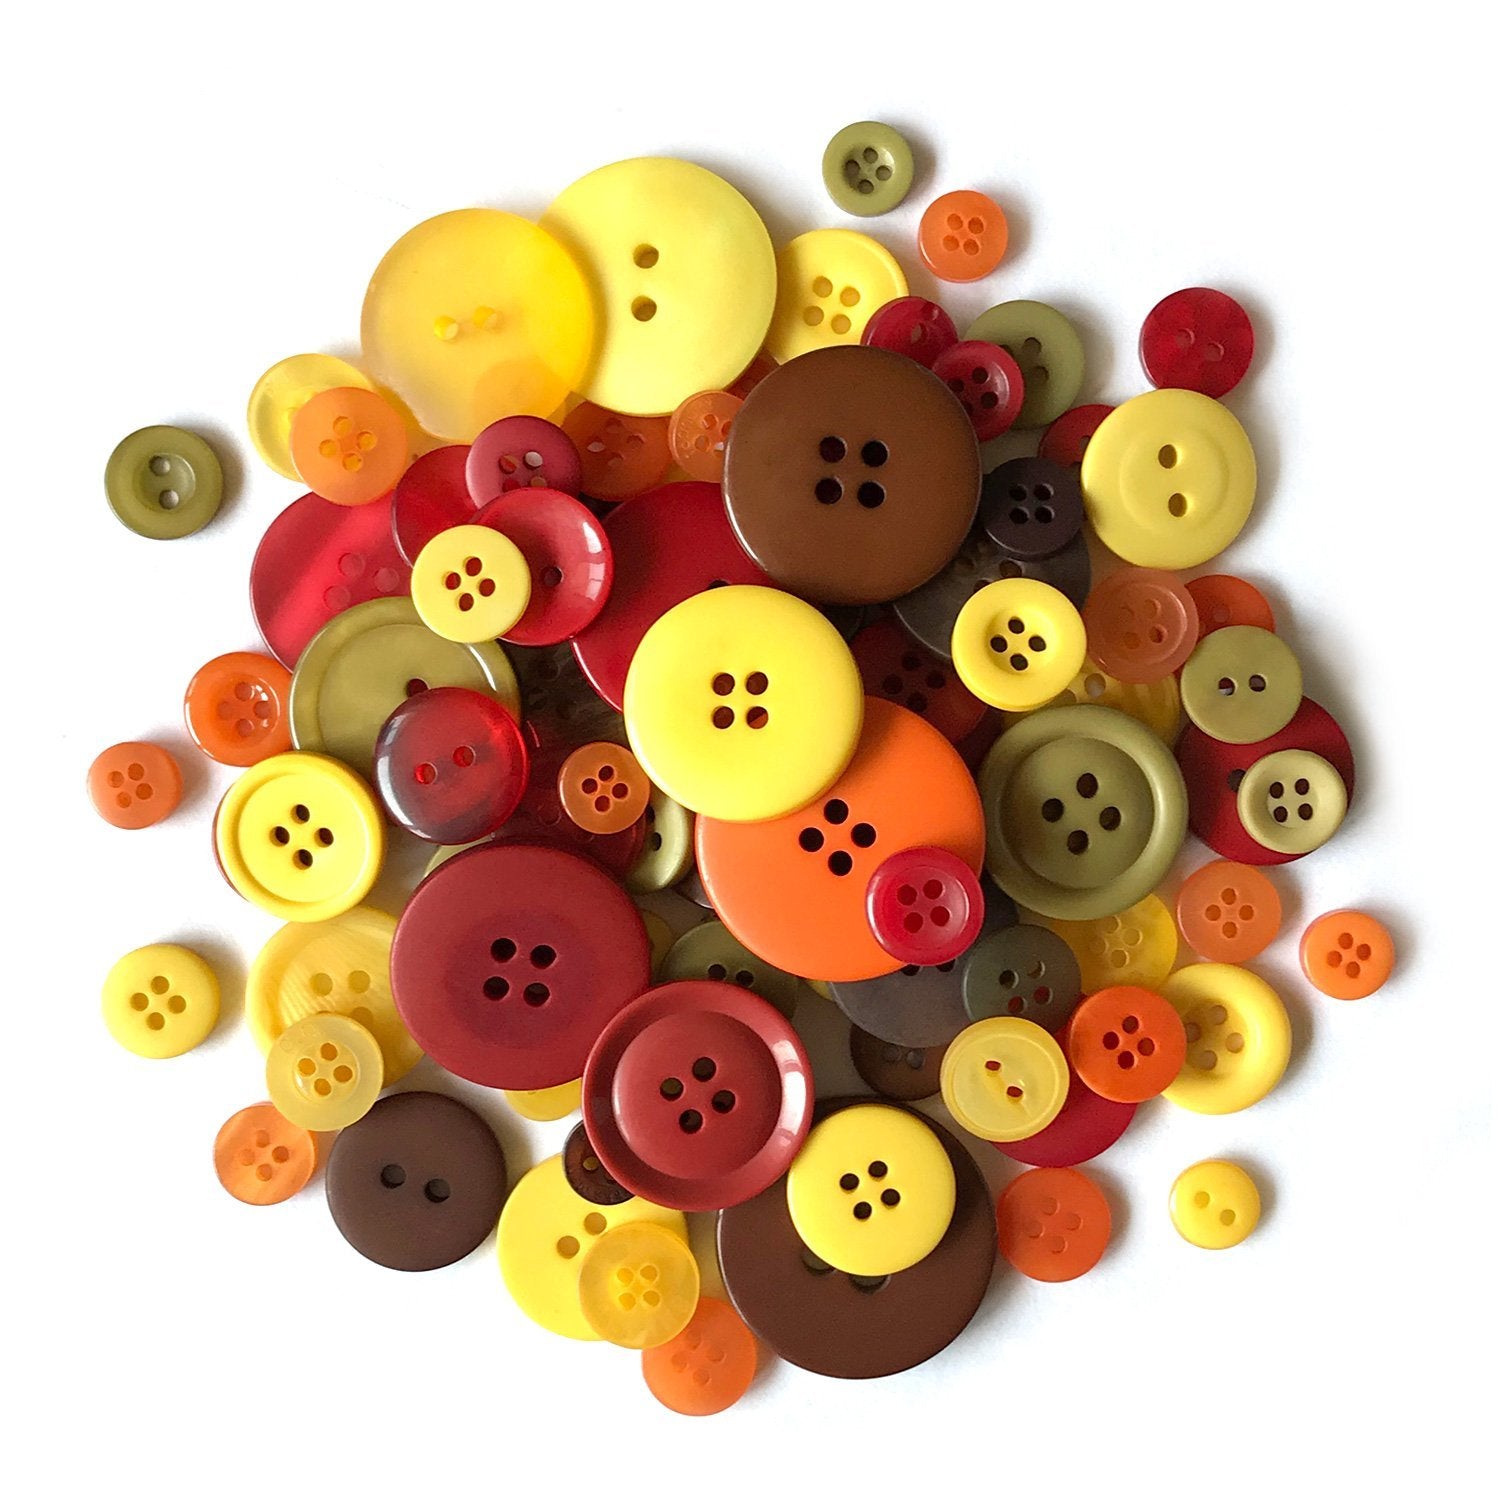 Craft Buttons 1/4 lb Red/Green/Yellow 1595W343 Closeout